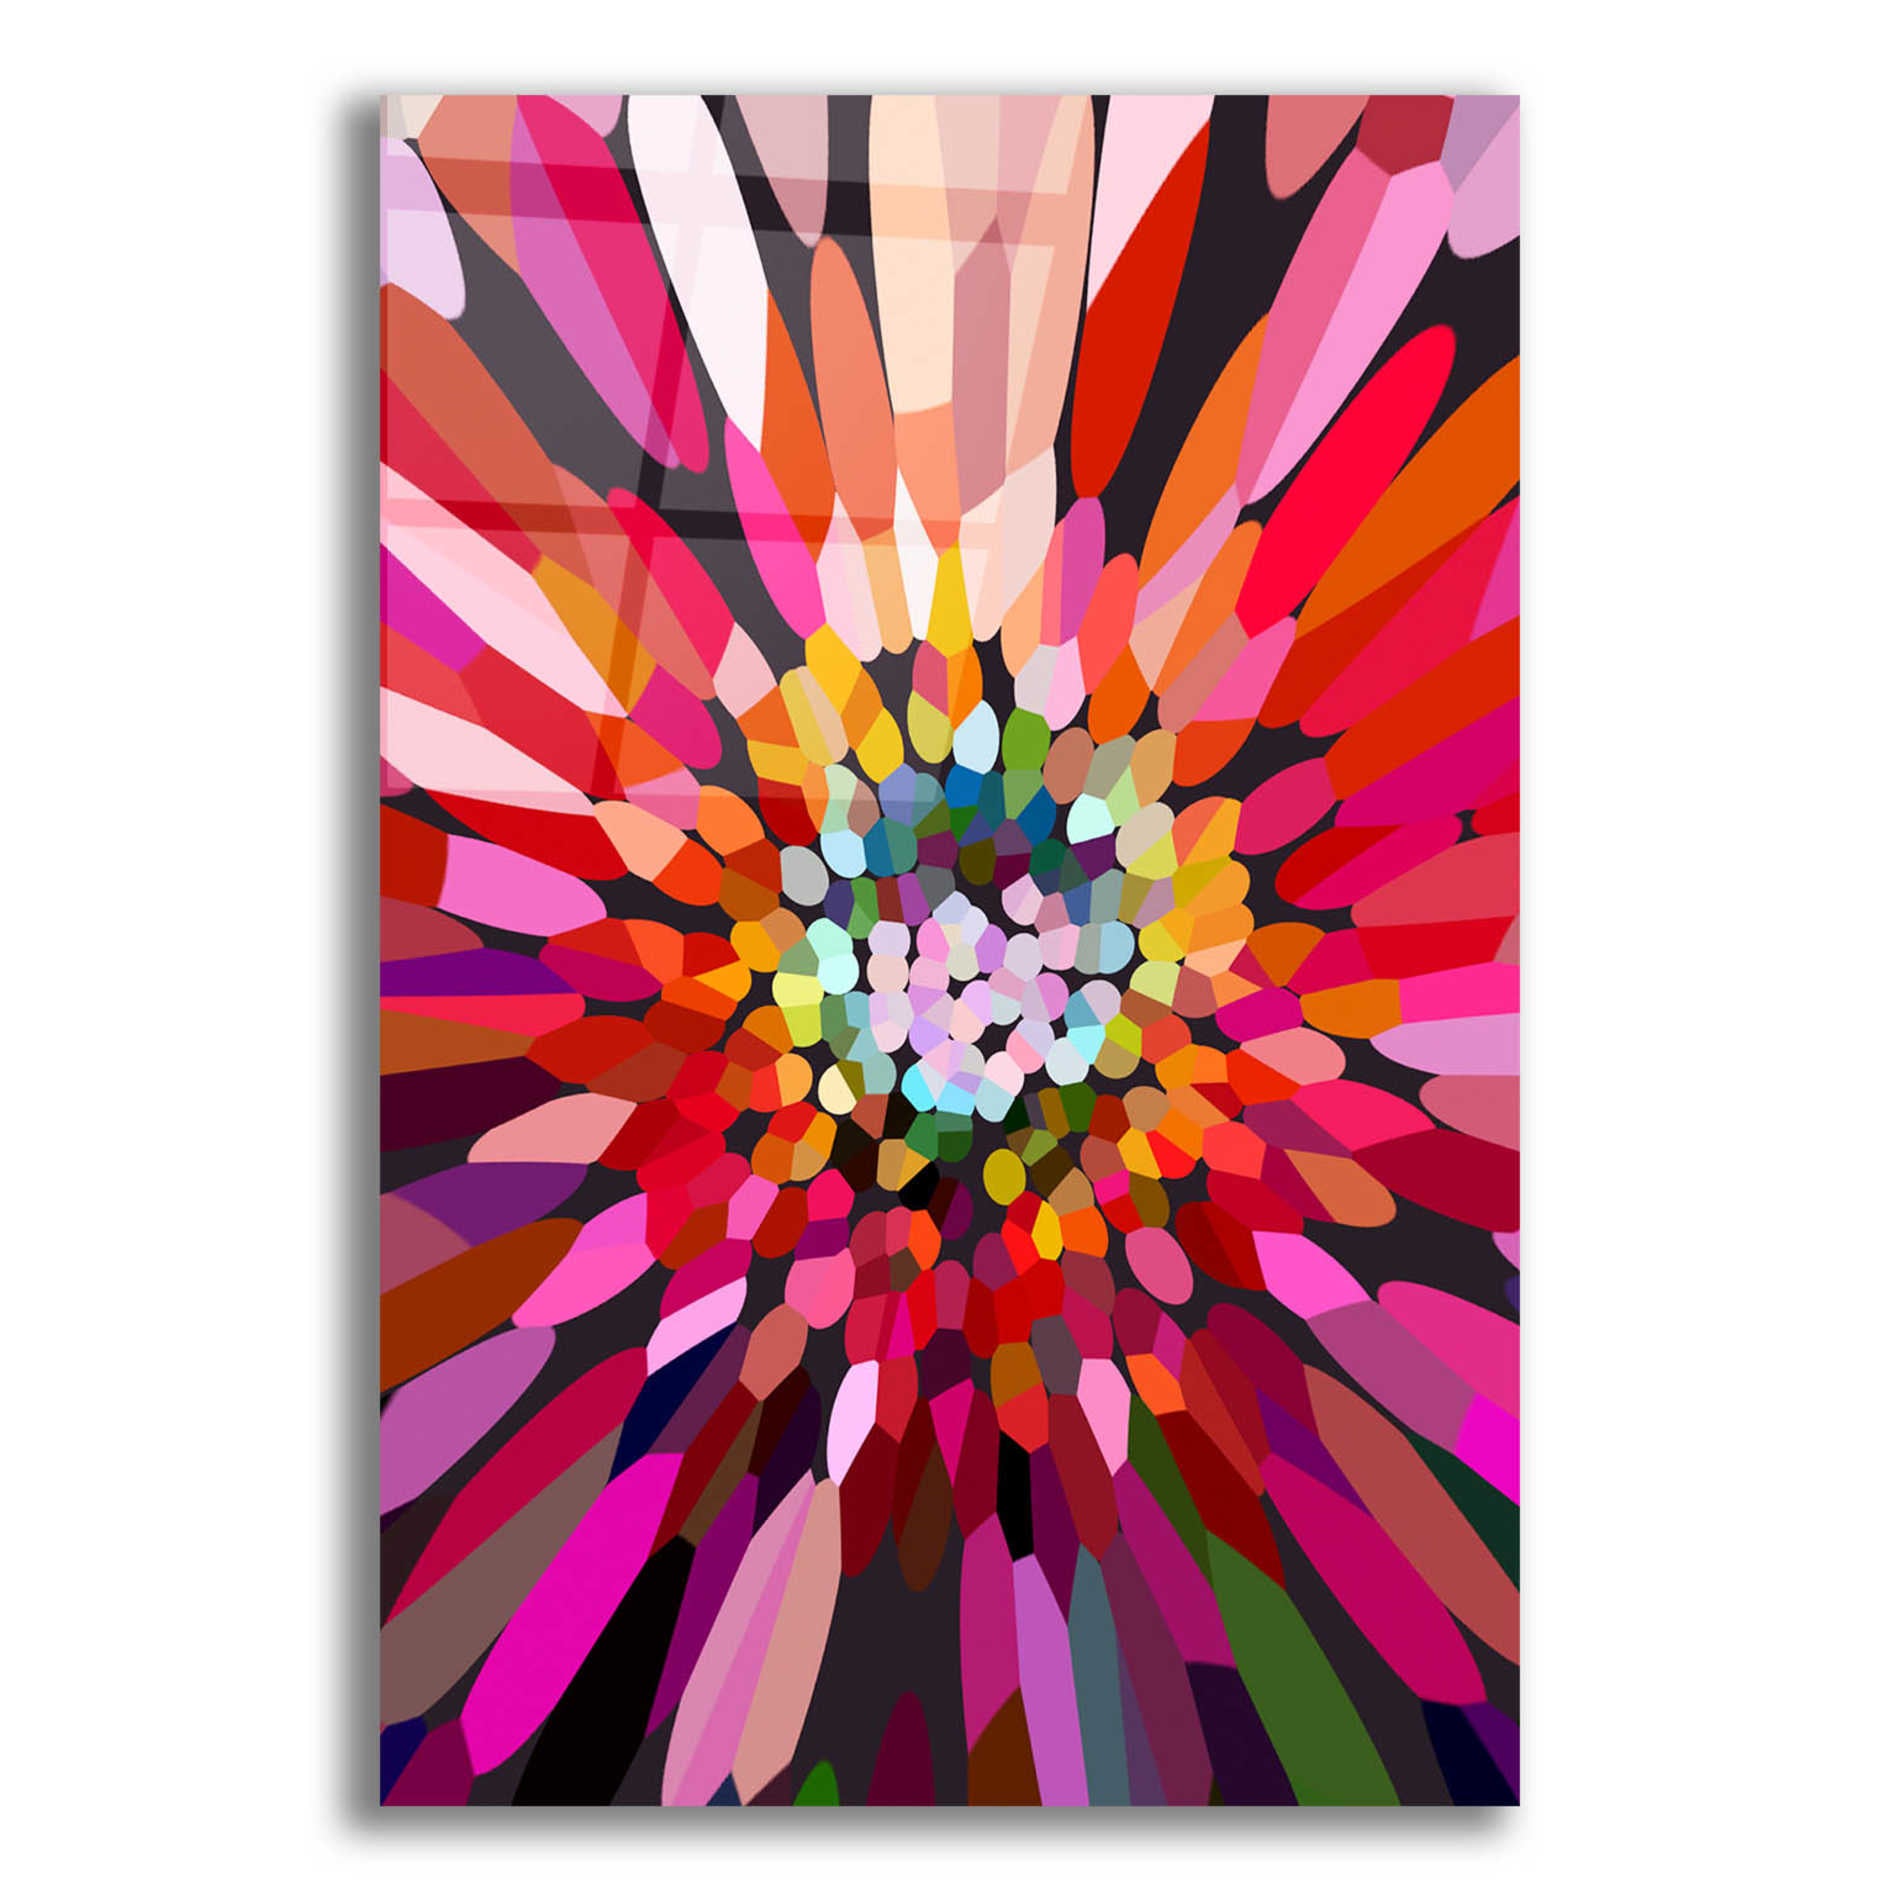 Epic Art 'Pink Flower' by Shandra Smith, Acrylic Glass Wall Art,12x16x1.1x0,20x24x1.1x0,26x30x1.74x0,40x54x1.74x0